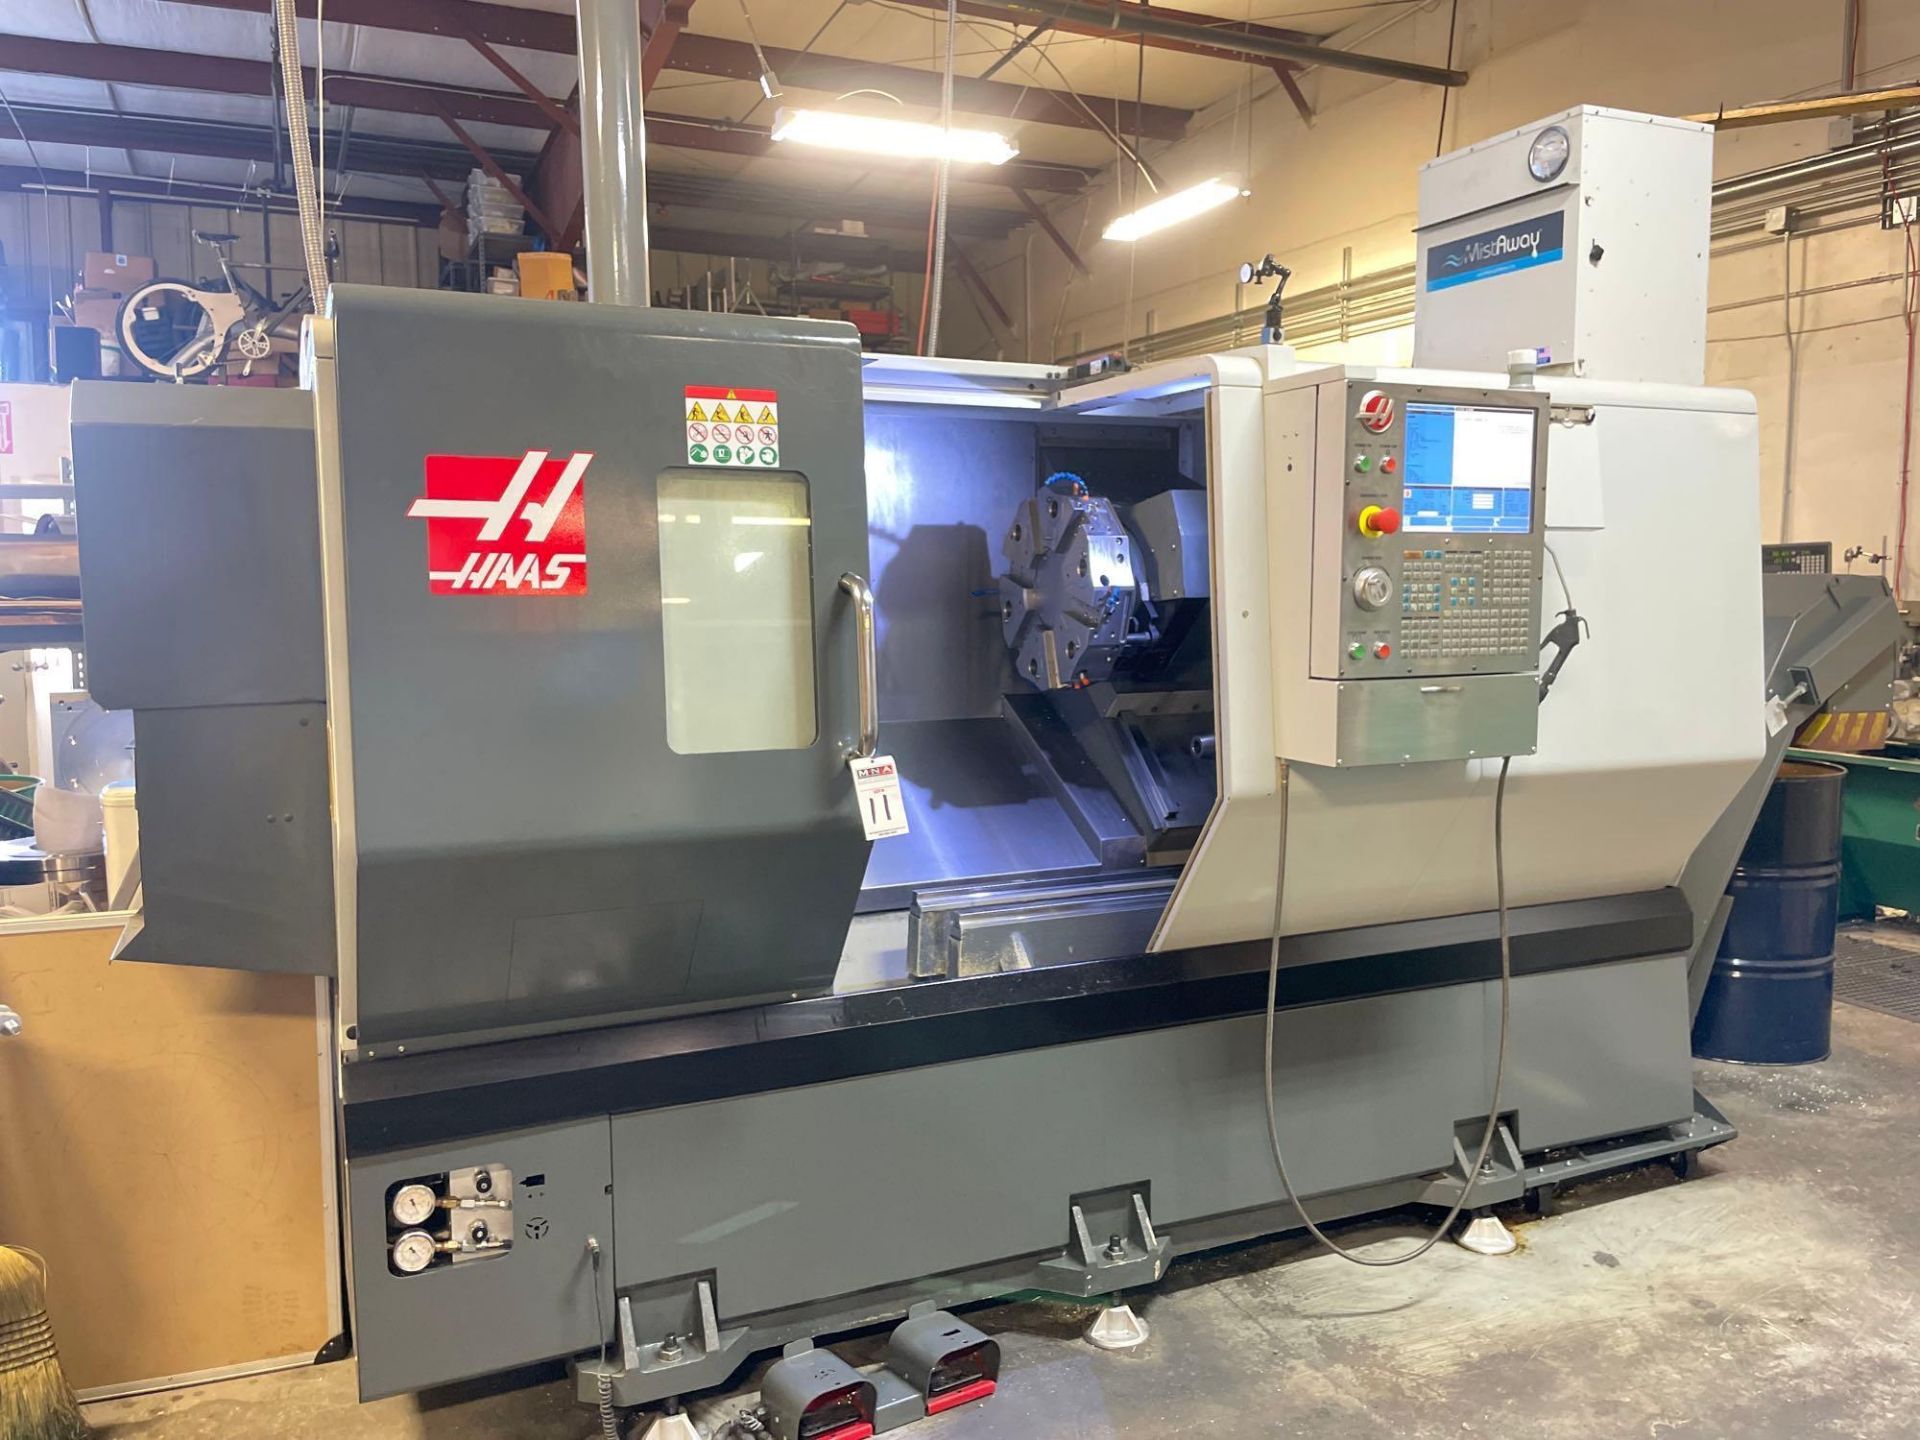 Haas ST-30 3-Axis CNC Lathe, C-Axis, 12" Hydraulic Chuck, 12 Position Turret, High Torque, New 2017 - Image 2 of 12